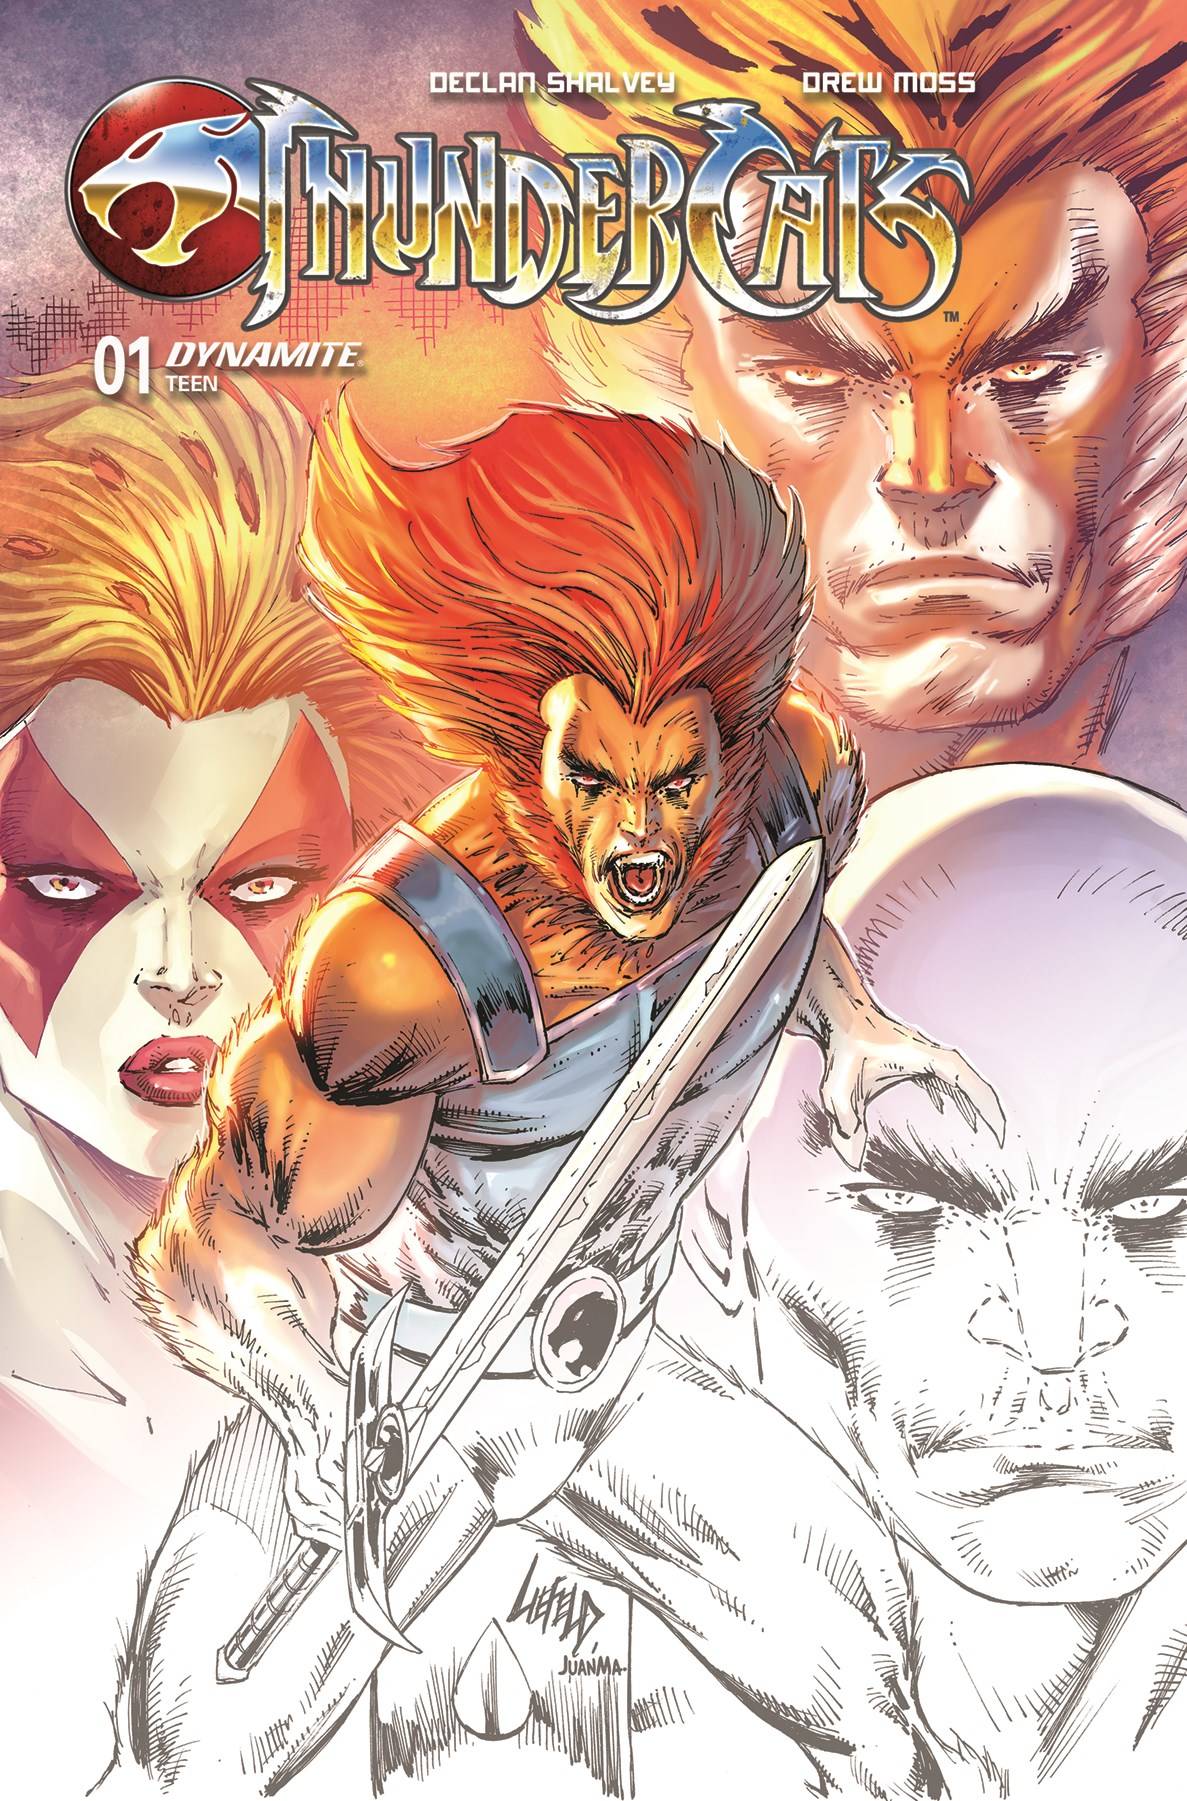 THUNDERCATS #1 2ND PTG CVR A LIEFELD [SIGNED BY DECLAN SHALVEY]